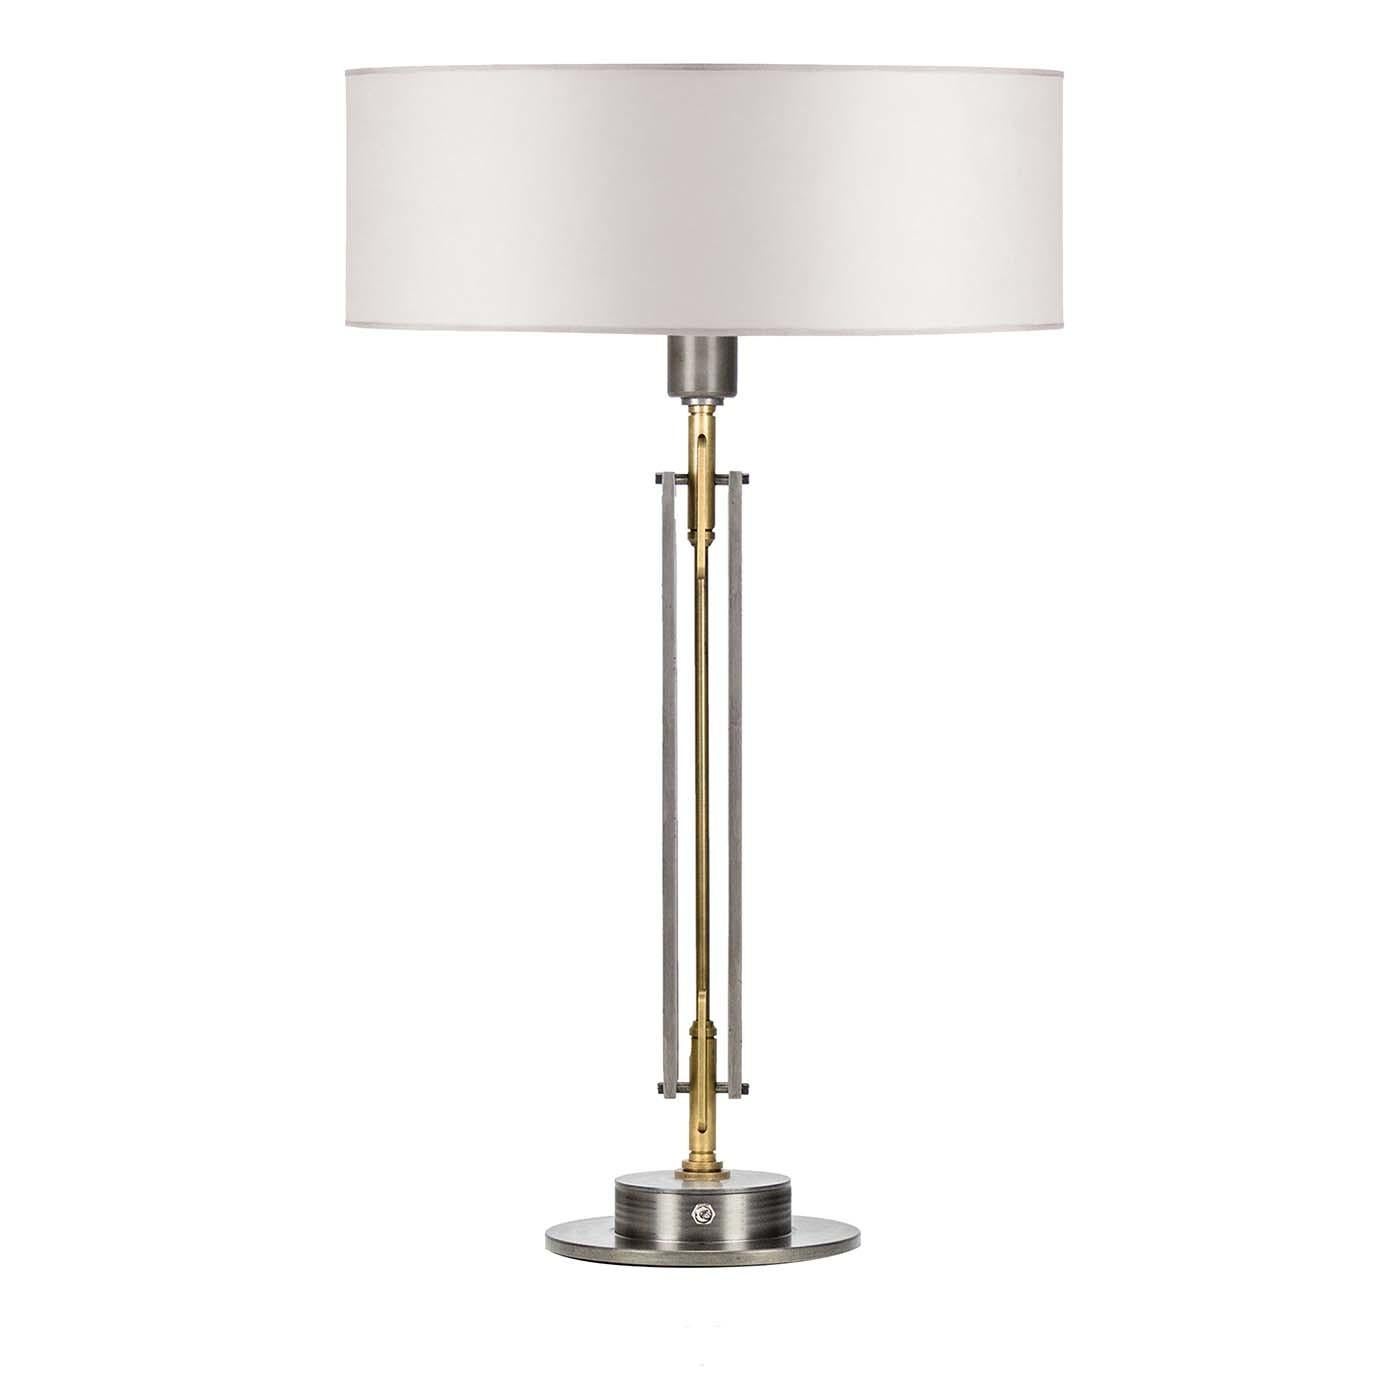 Modern Lenmo White Table Lamp #1 by Acanthus